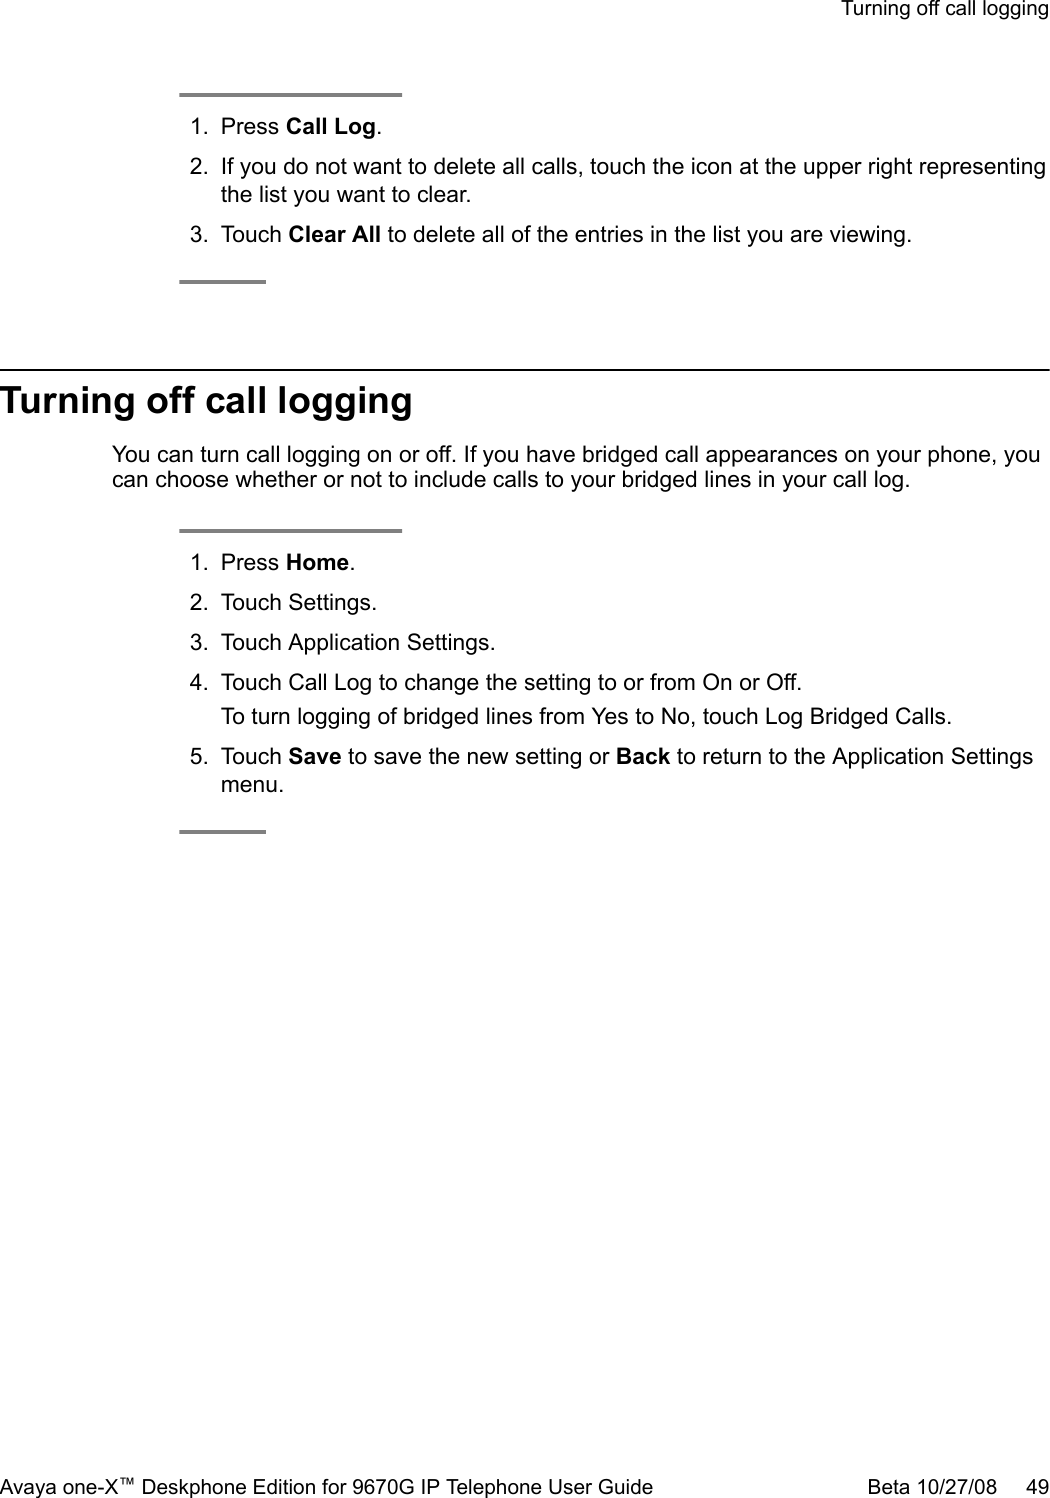 1. Press Call Log.2. If you do not want to delete all calls, touch the icon at the upper right representingthe list you want to clear.3. Touch Clear All to delete all of the entries in the list you are viewing.Turning off call loggingYou can turn call logging on or off. If you have bridged call appearances on your phone, youcan choose whether or not to include calls to your bridged lines in your call log.1. Press Home.2. Touch Settings.3. Touch Application Settings.4. Touch Call Log to change the setting to or from On or Off.To turn logging of bridged lines from Yes to No, touch Log Bridged Calls.5. Touch Save to save the new setting or Back to return to the Application Settingsmenu.Turning off call loggingAvaya one-X™ Deskphone Edition for 9670G IP Telephone User Guide Beta 10/27/08     49